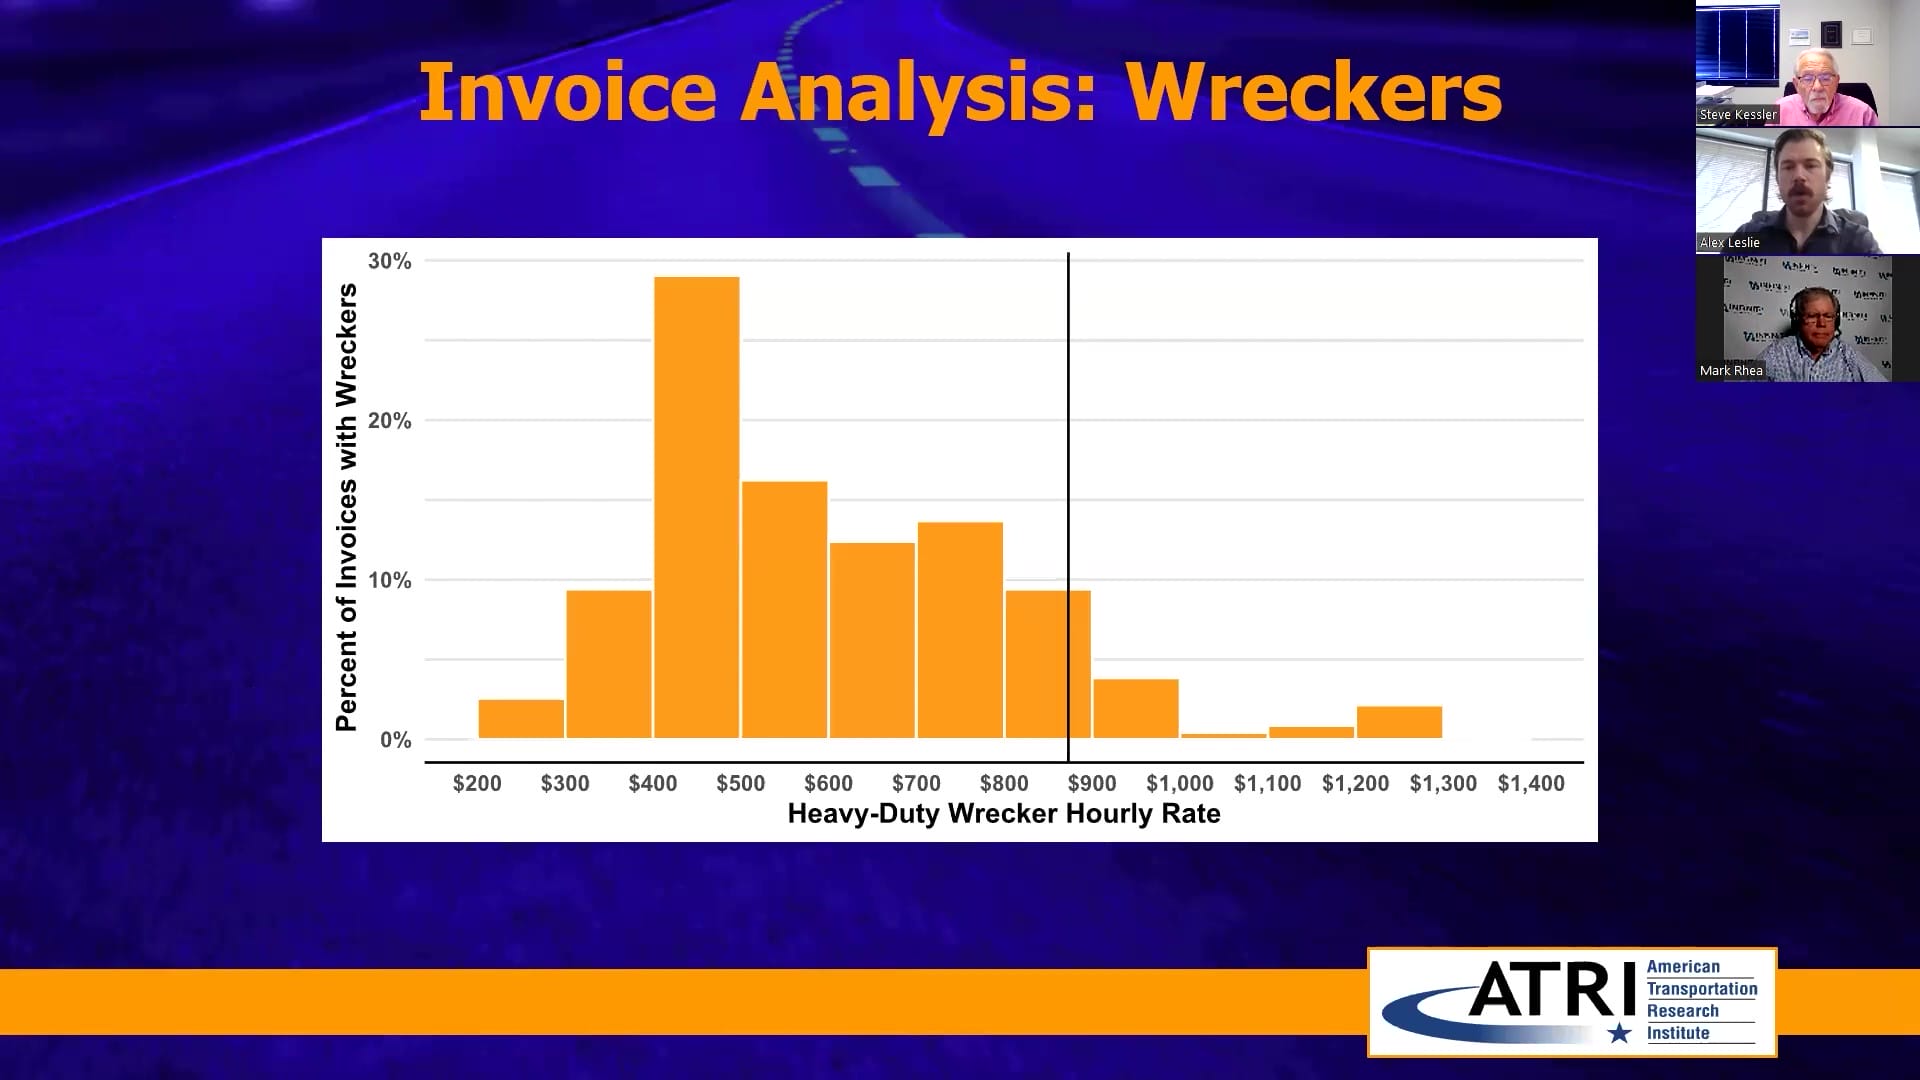 ATRI’s Research on Predatory Towing Invoice Analysis Wreckers